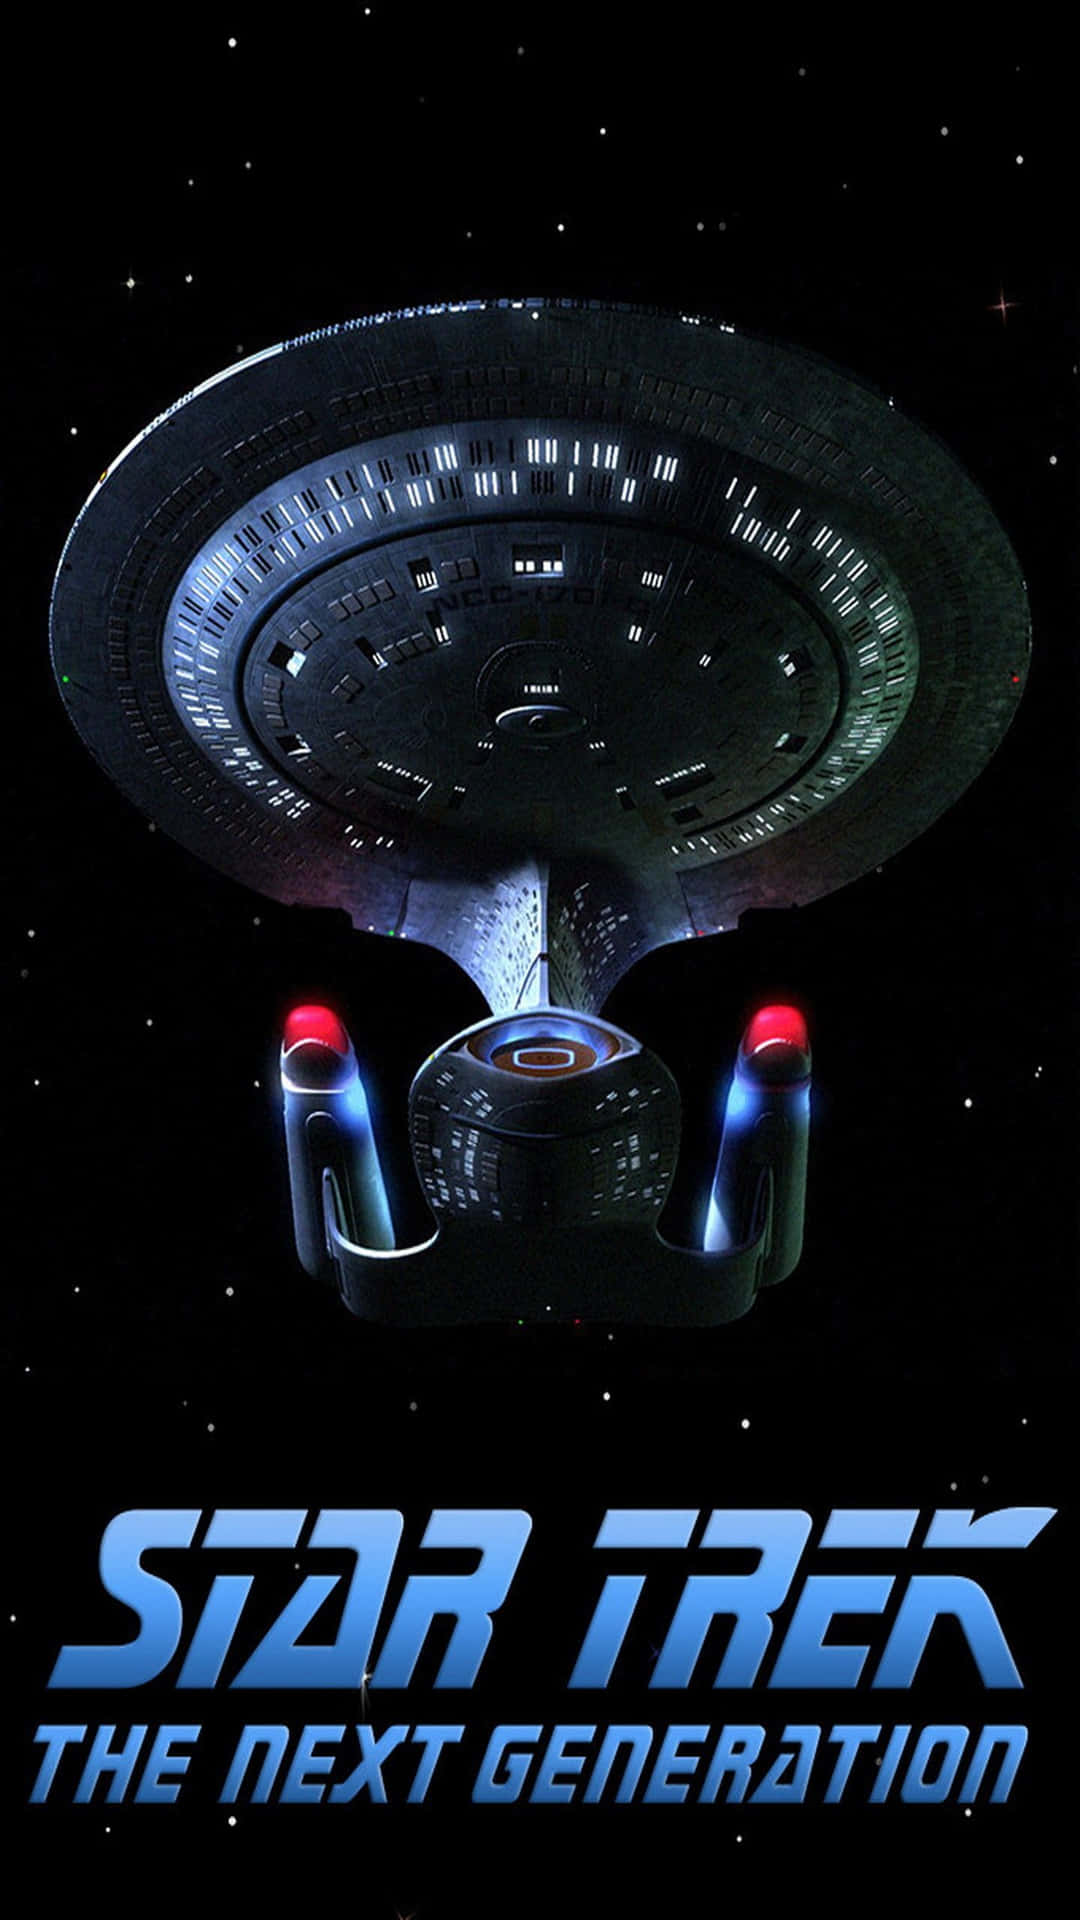 The poster for the television show Star Trek: The Next Generation. - Star Trek